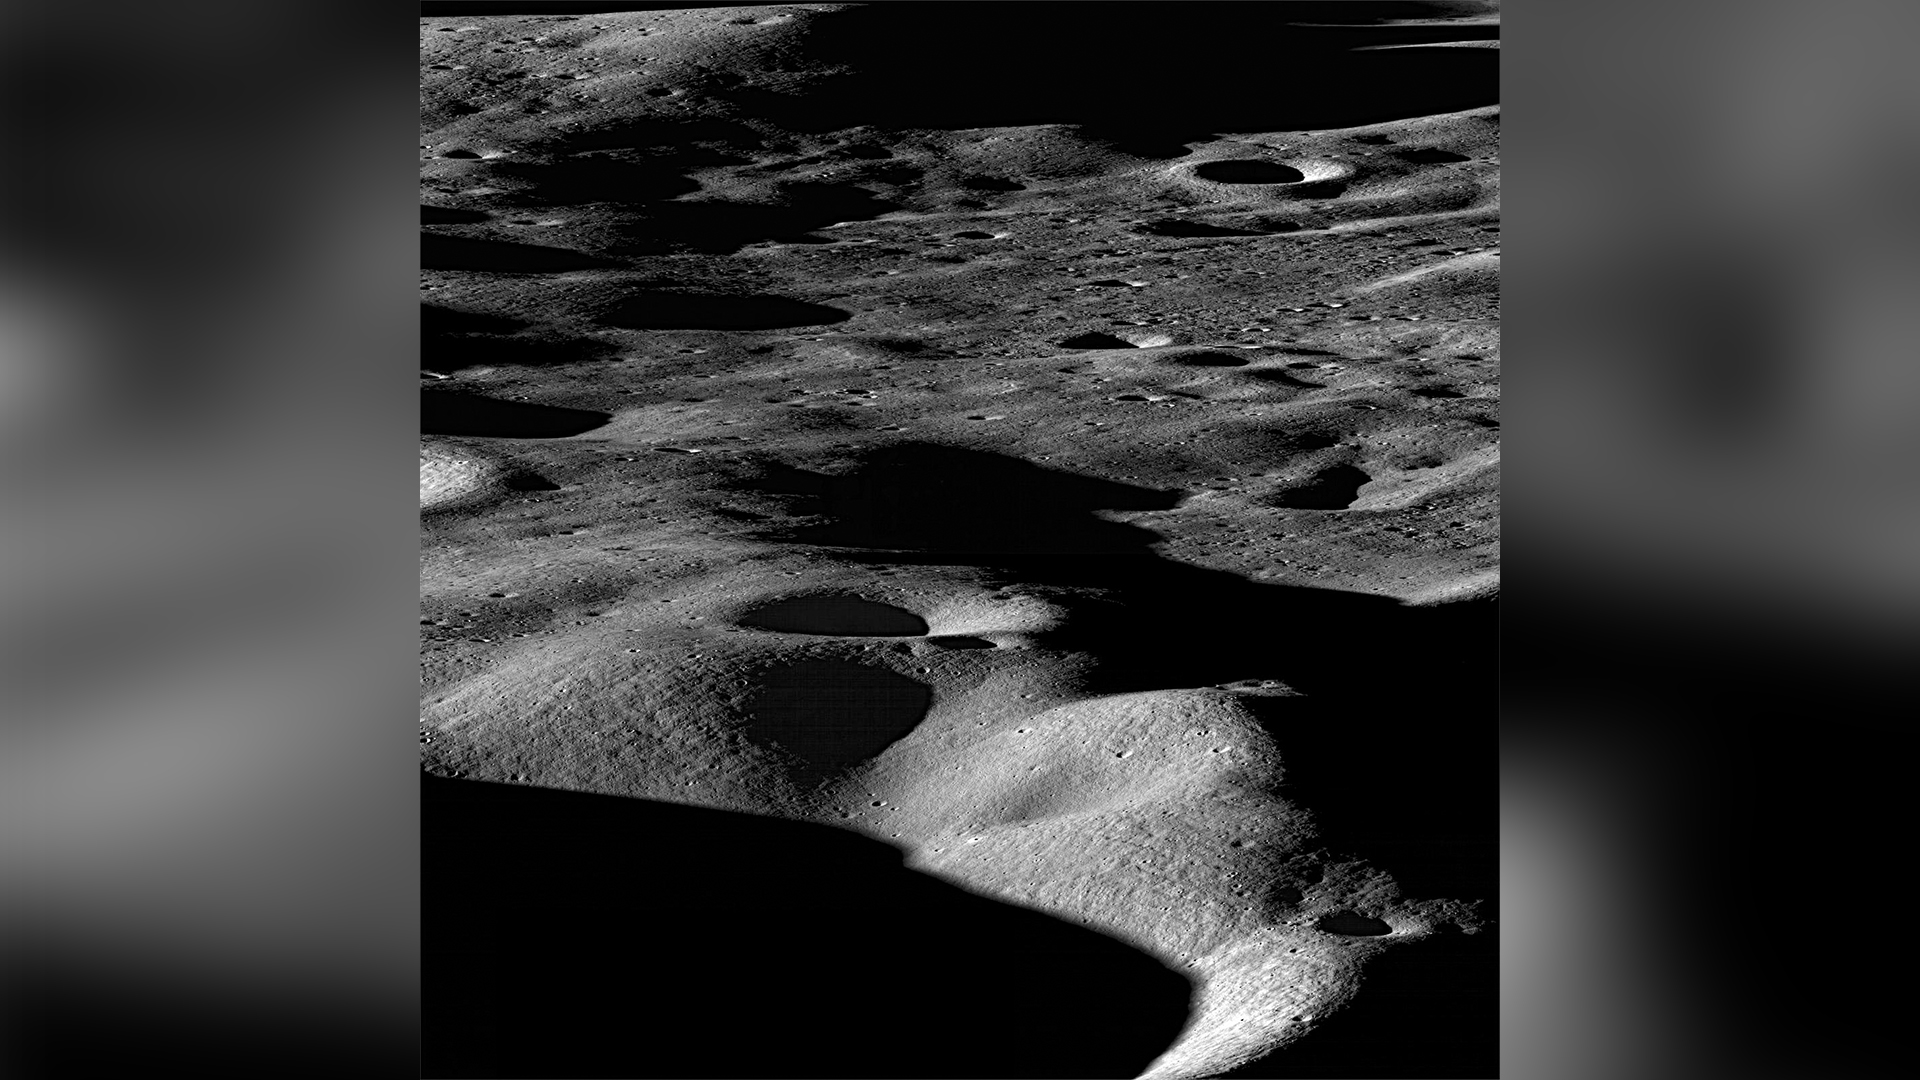 Moon mountains caused by impacts.